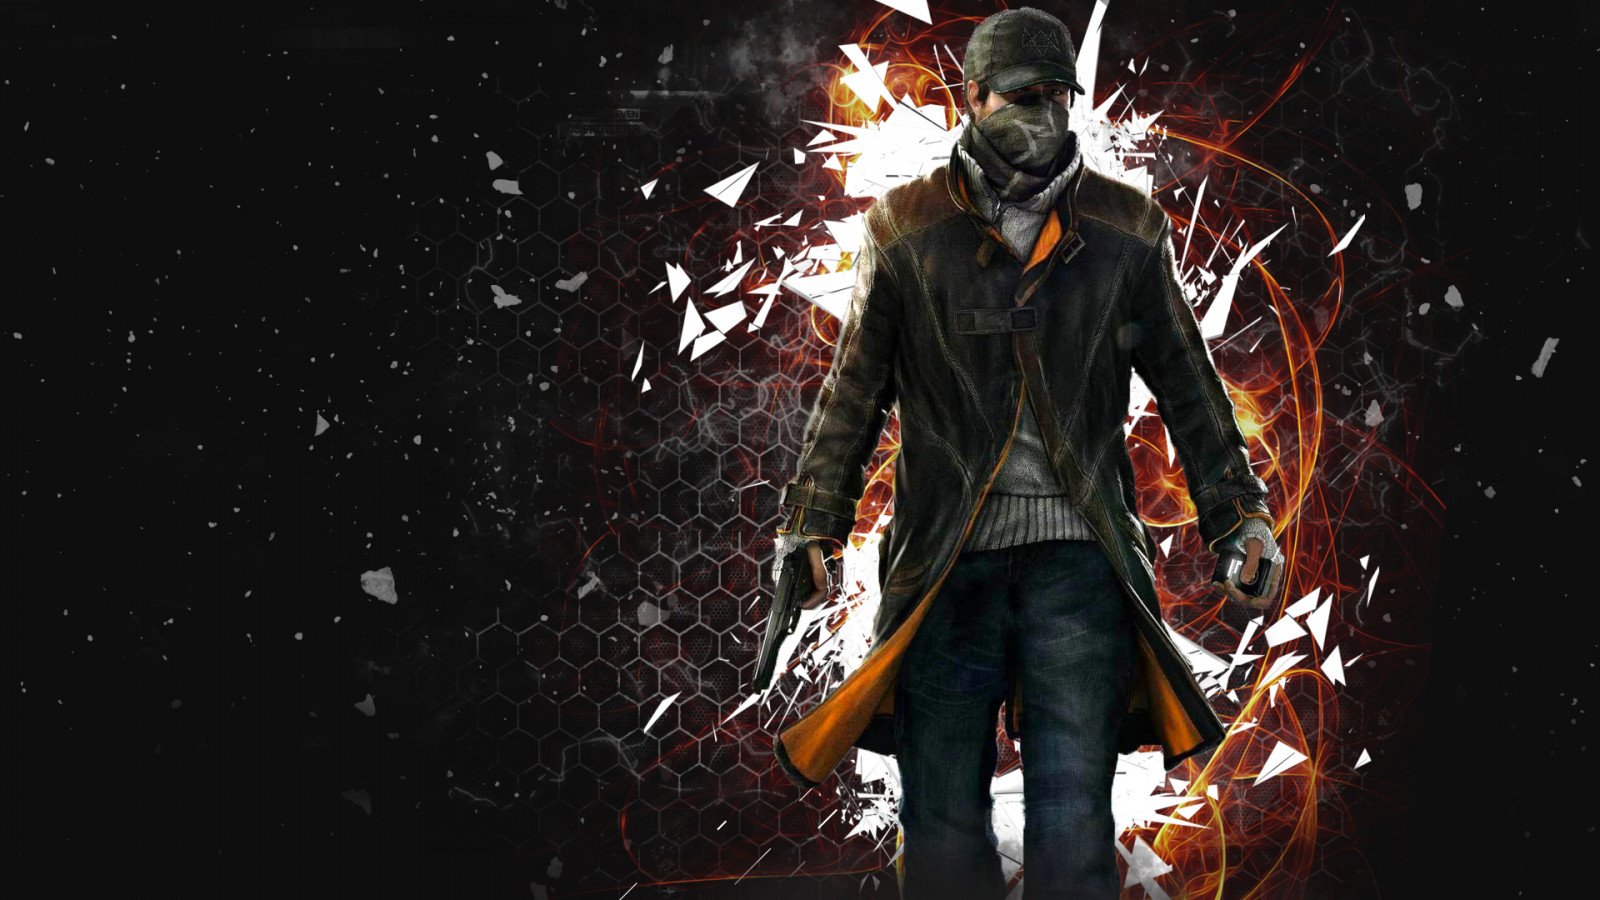 Watch Dogs Pic Wallpapers